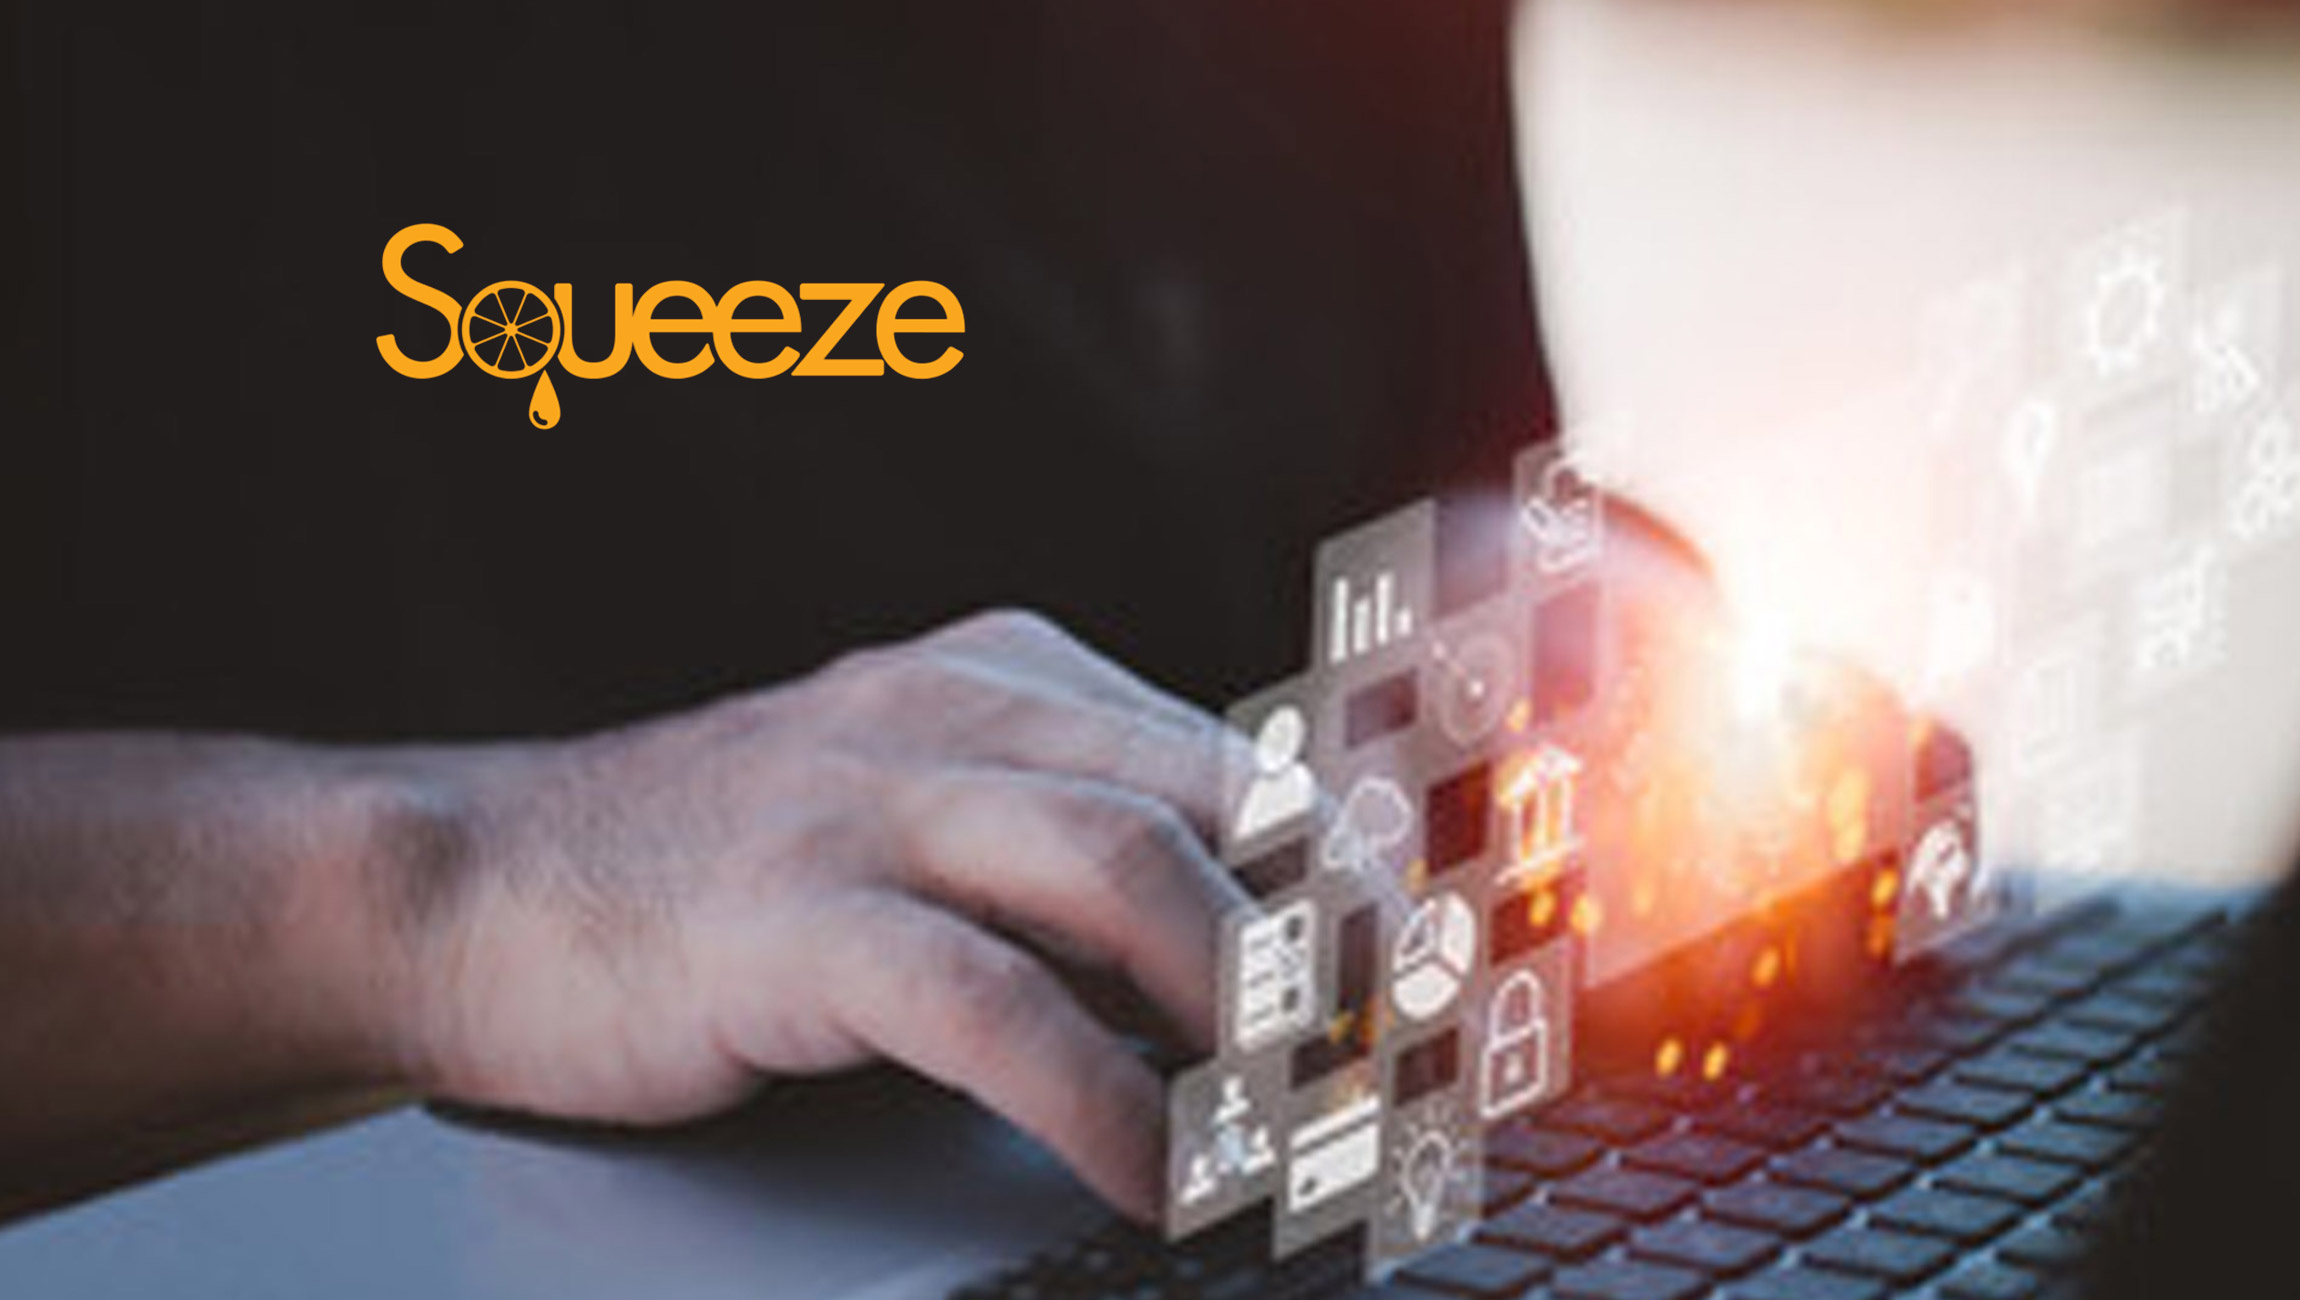 Squeeze-Strengthens-Its-Position-as-the-Leader-in-Sales-Experience-With-Launch-of-New-Company-Website